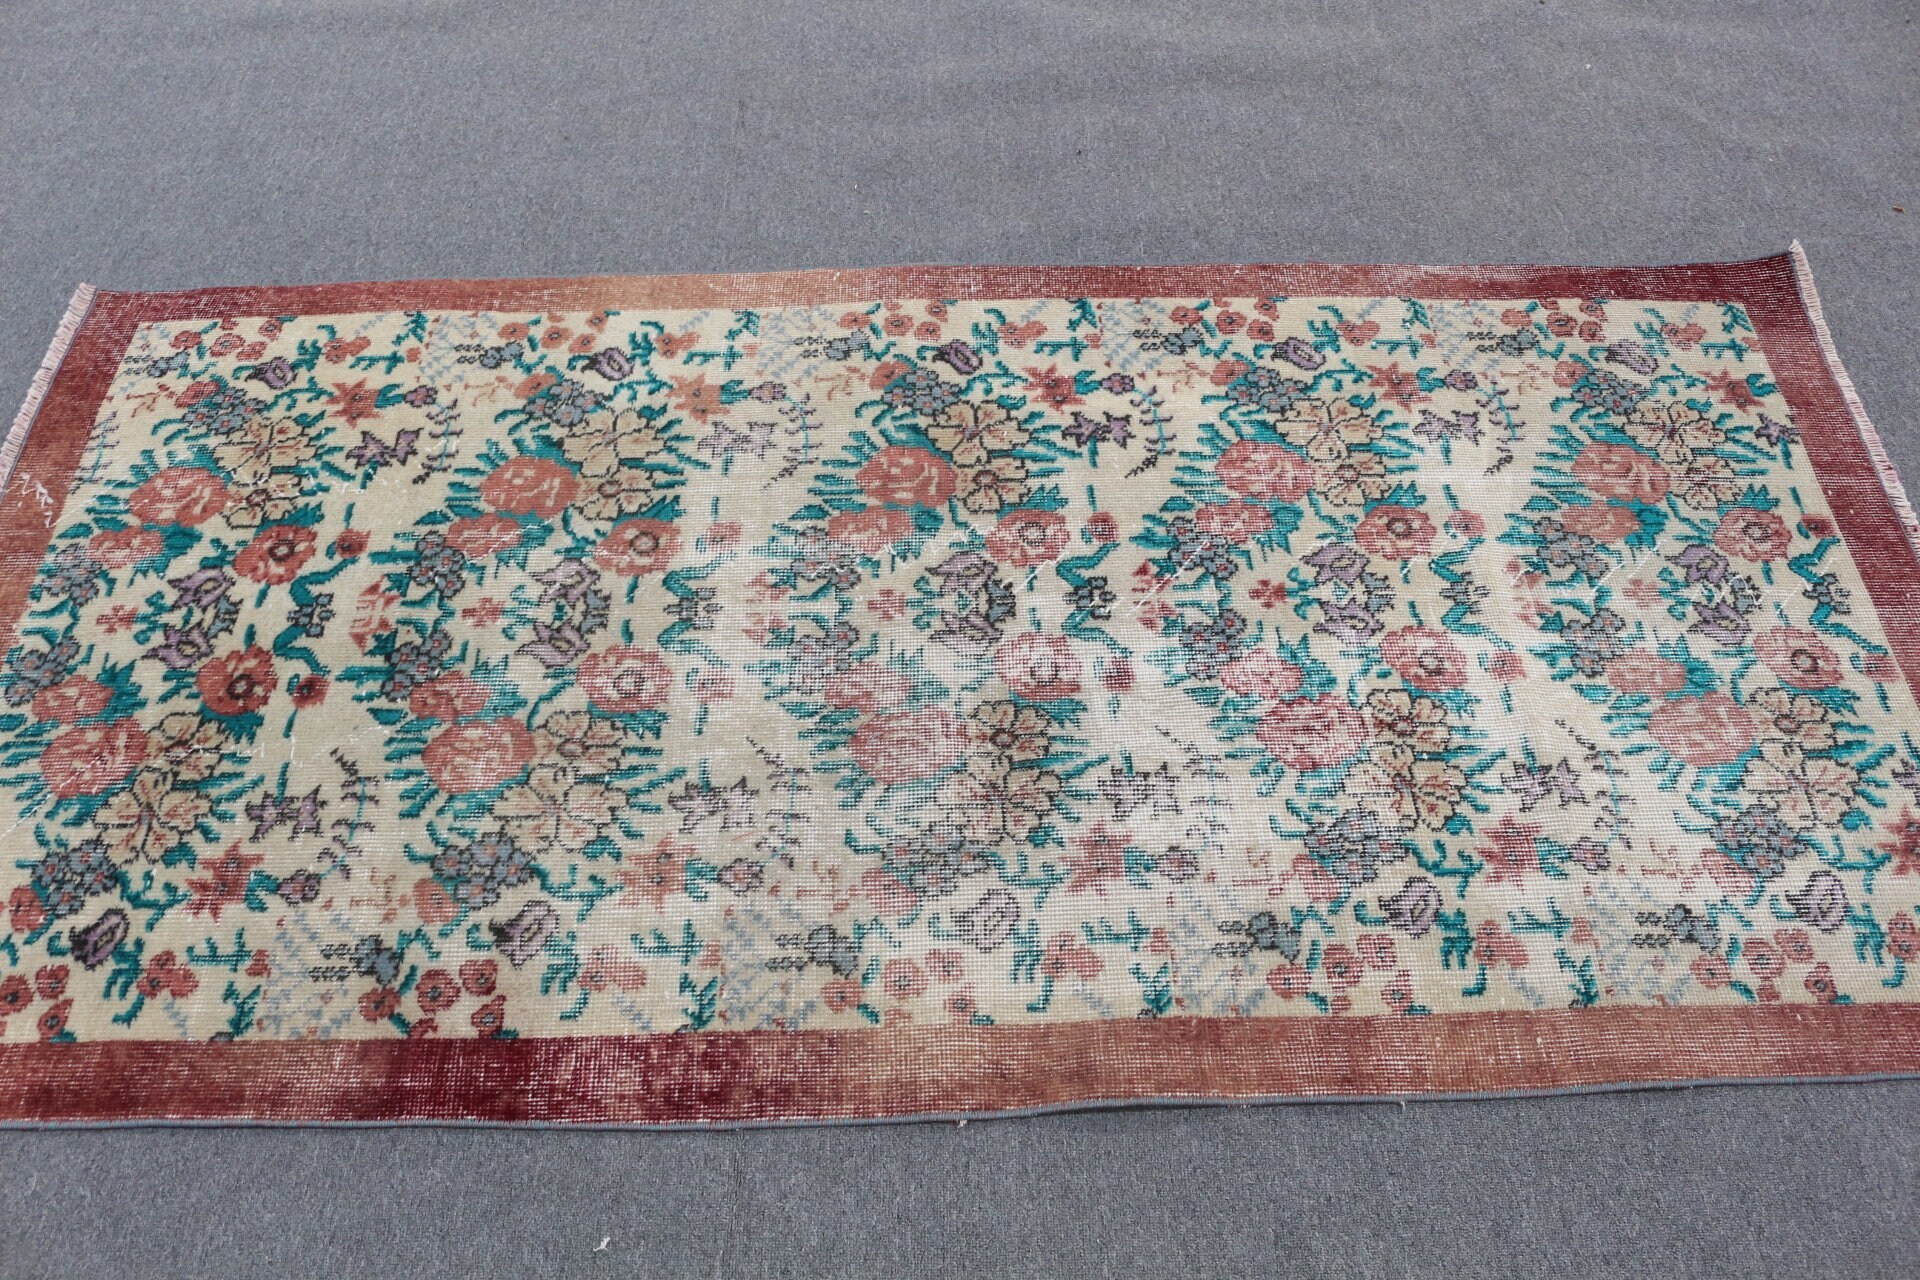 3.4x6.7 ft Accent Rug, Rugs for Bedroom, Red Wool Rug, Turkish Rug, Vintage Rugs, Anatolian Rug, Entry Rug, Kitchen Rug